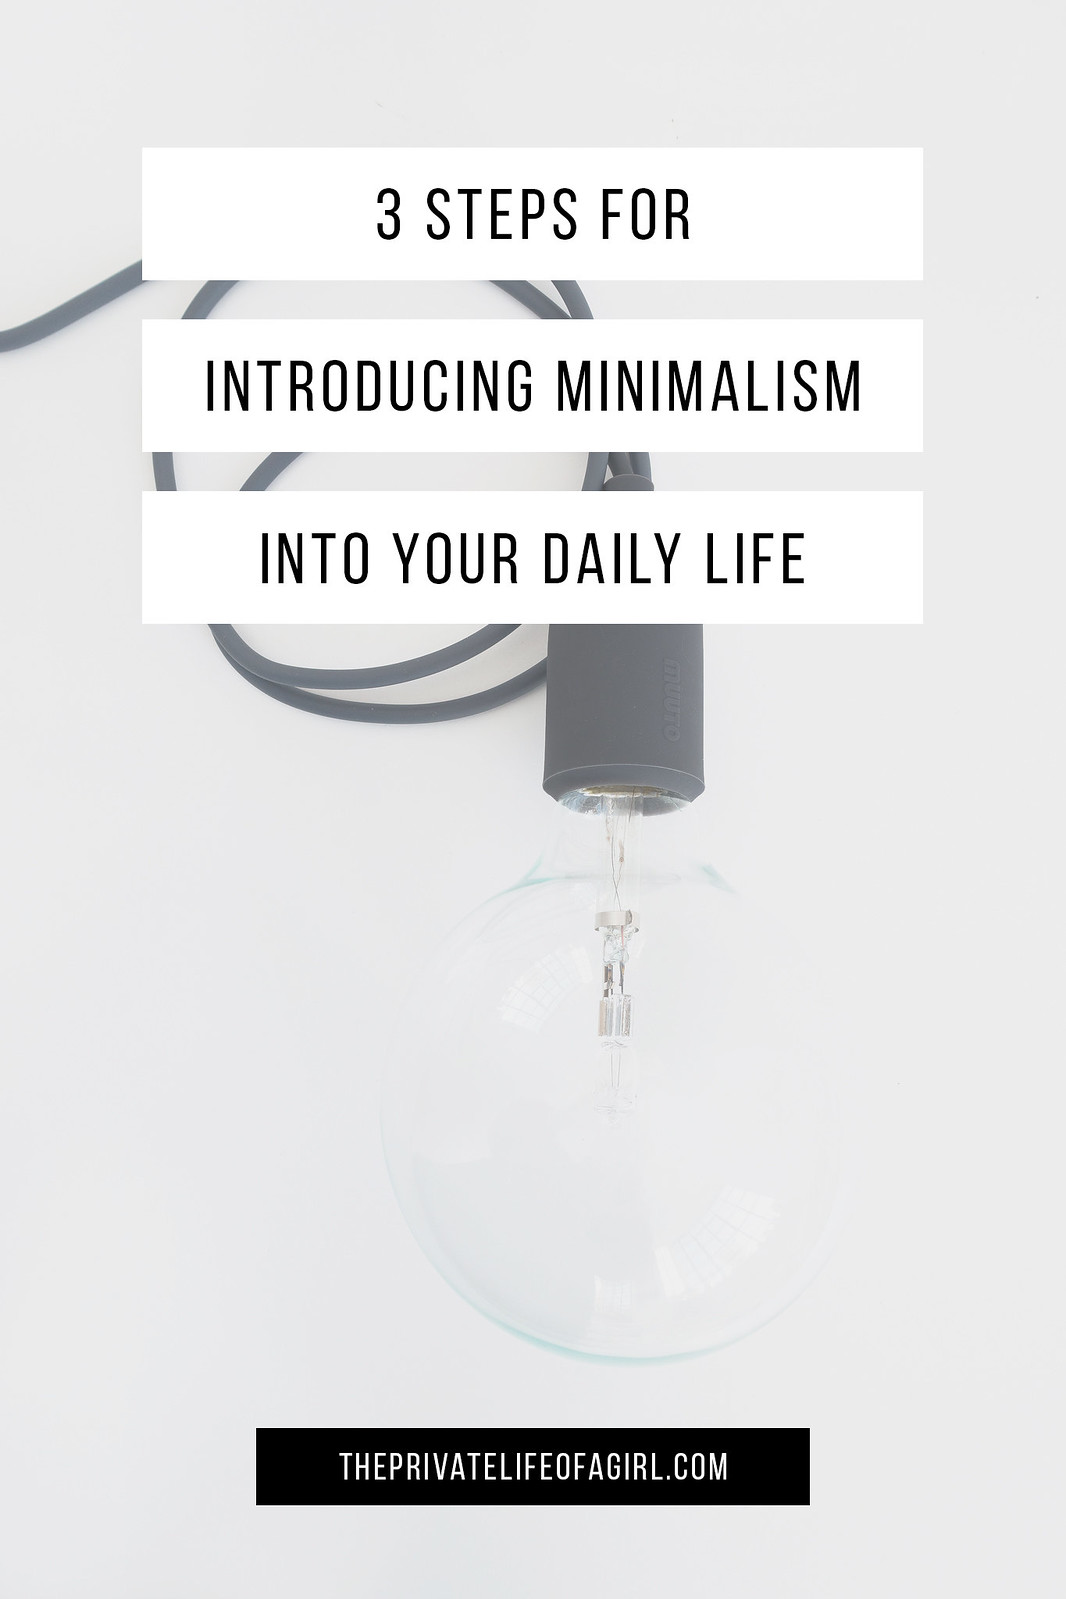 3 Steps For Introducing Minimalism Into Your Life